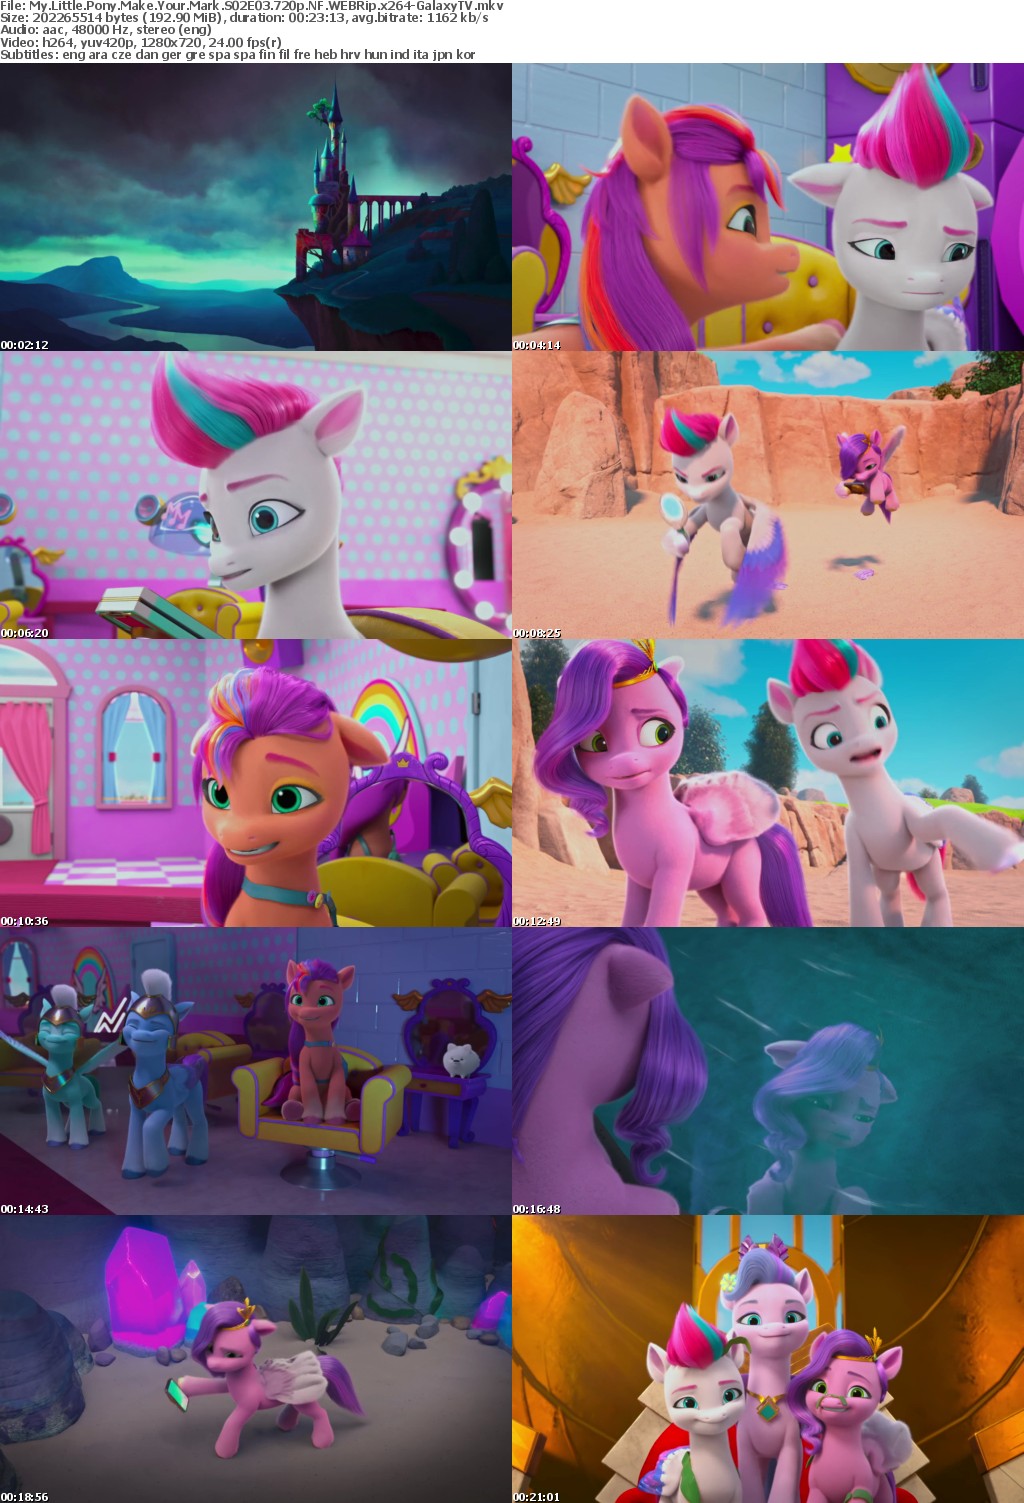 My Little Pony Make Your Mark S02 COMPLETE 720p NF WEBRip x264-GalaxyTV